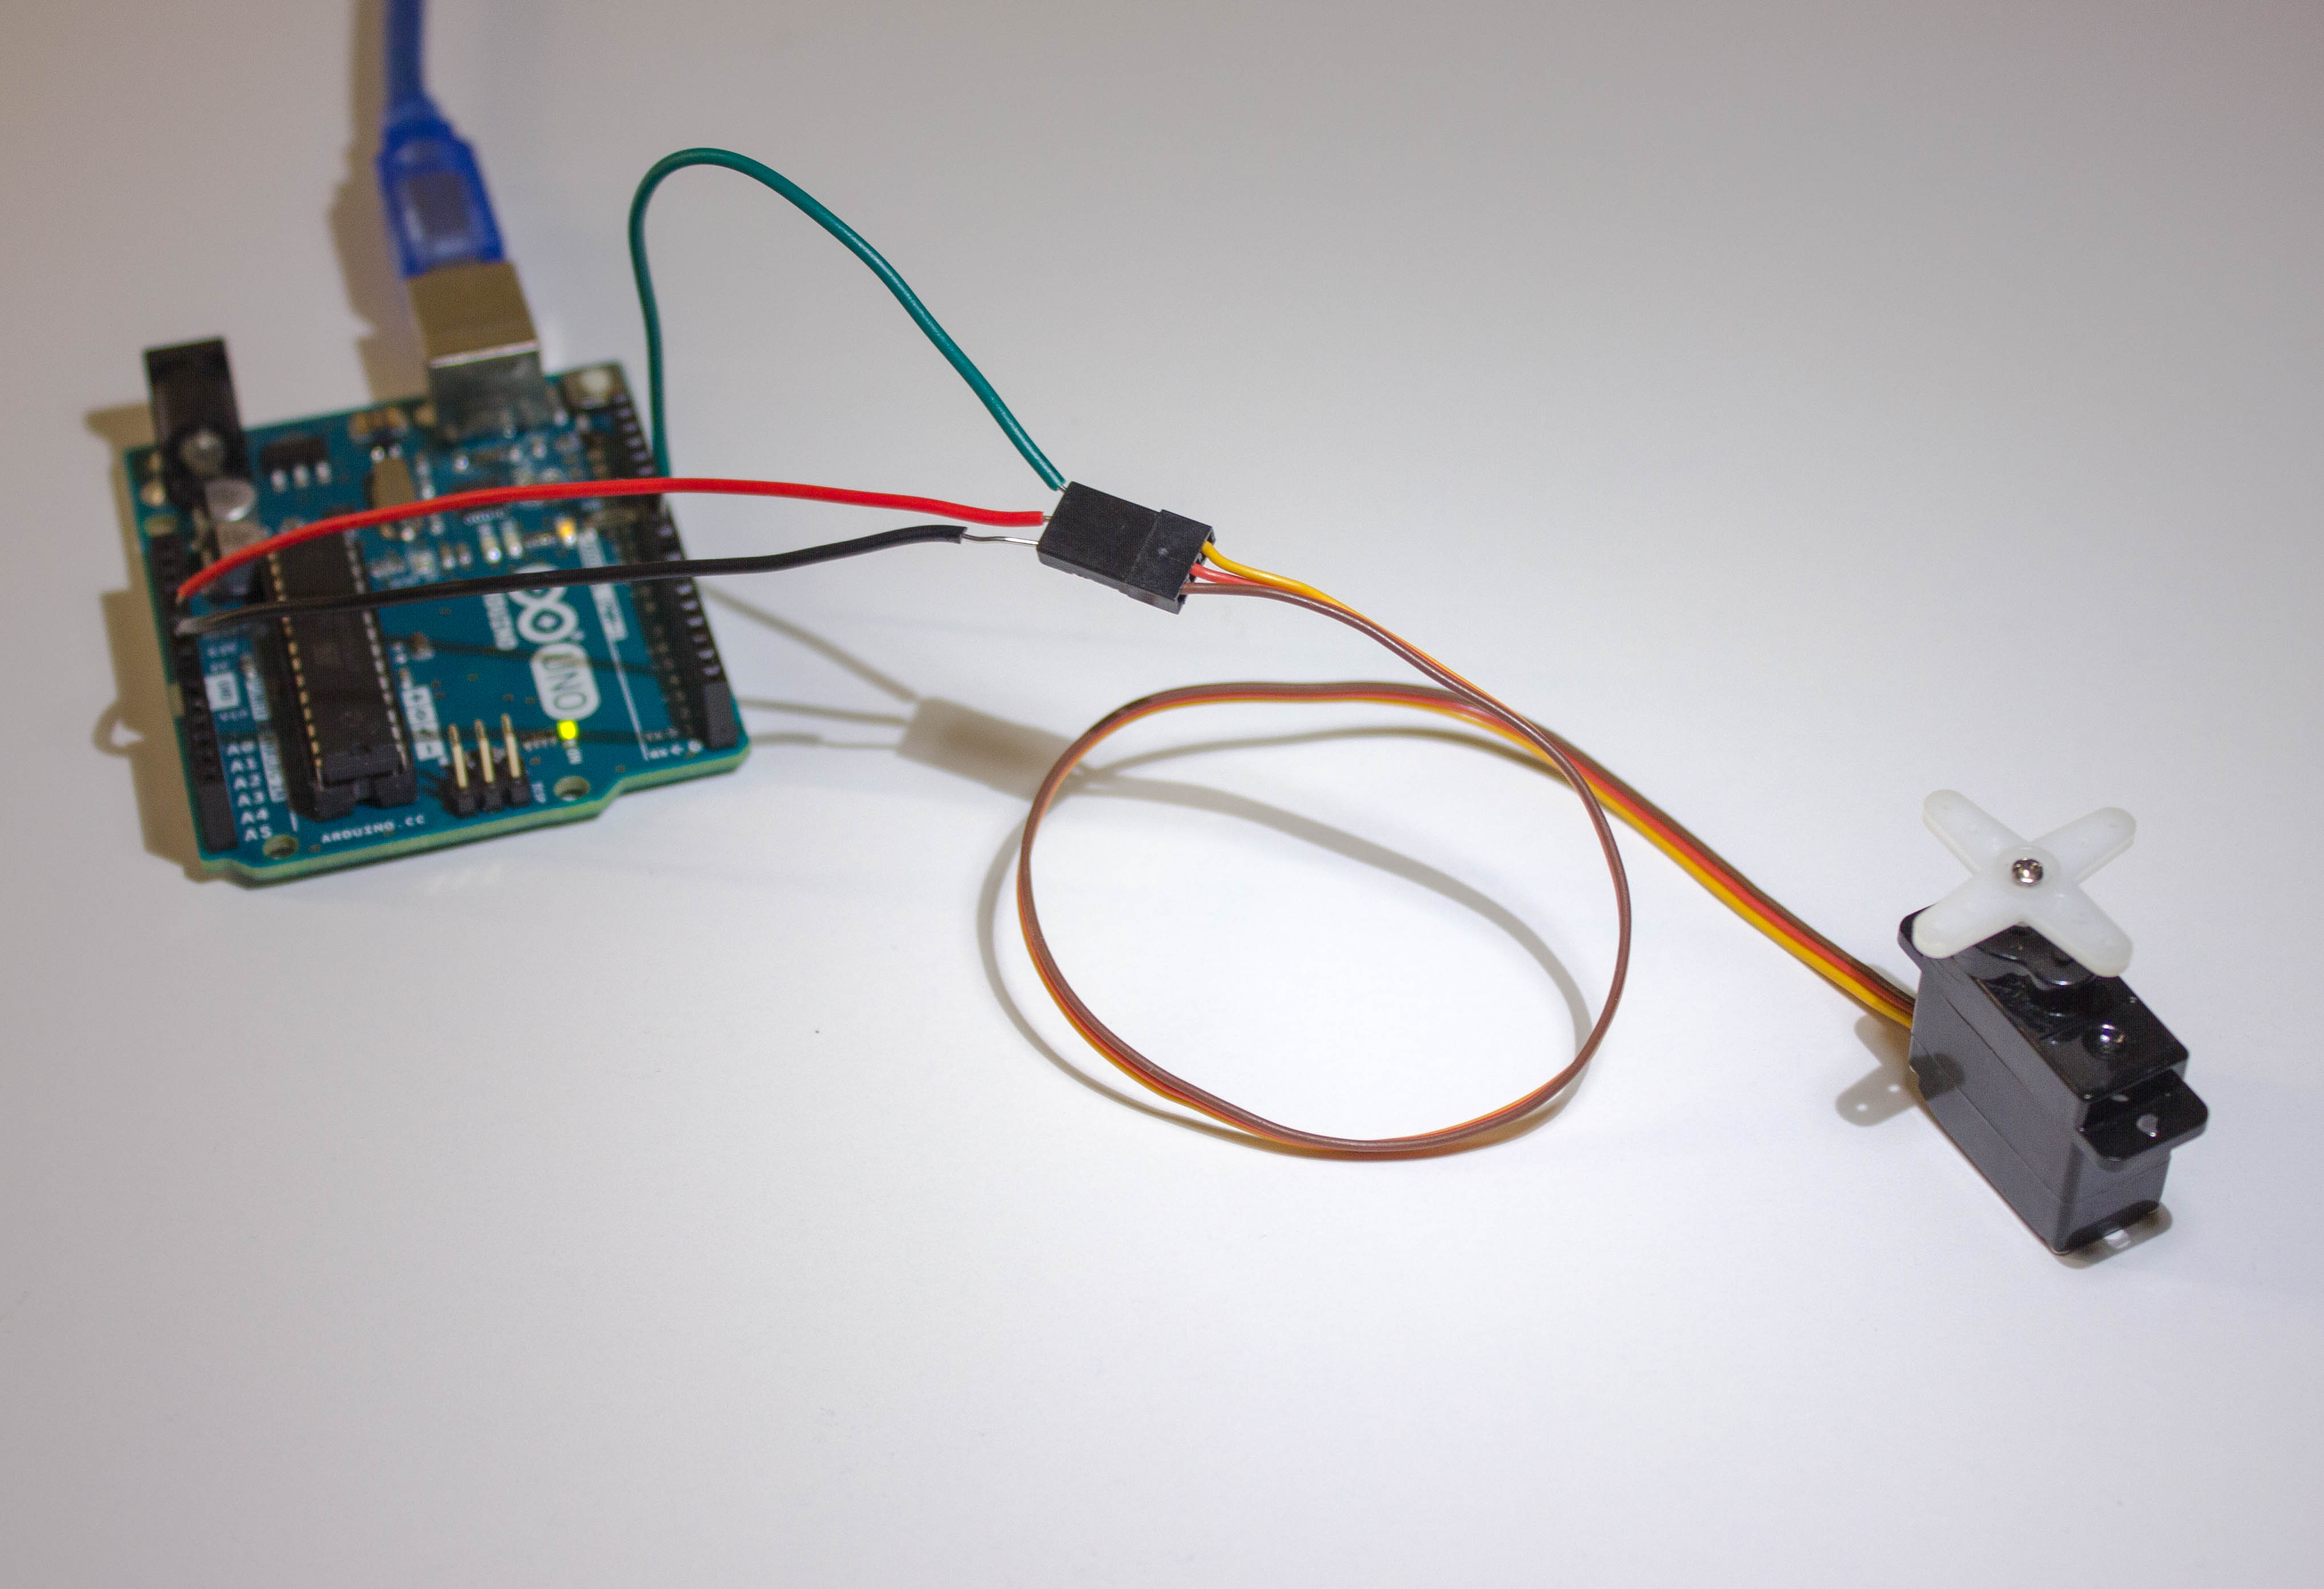 An Arduino hooked up to a servo